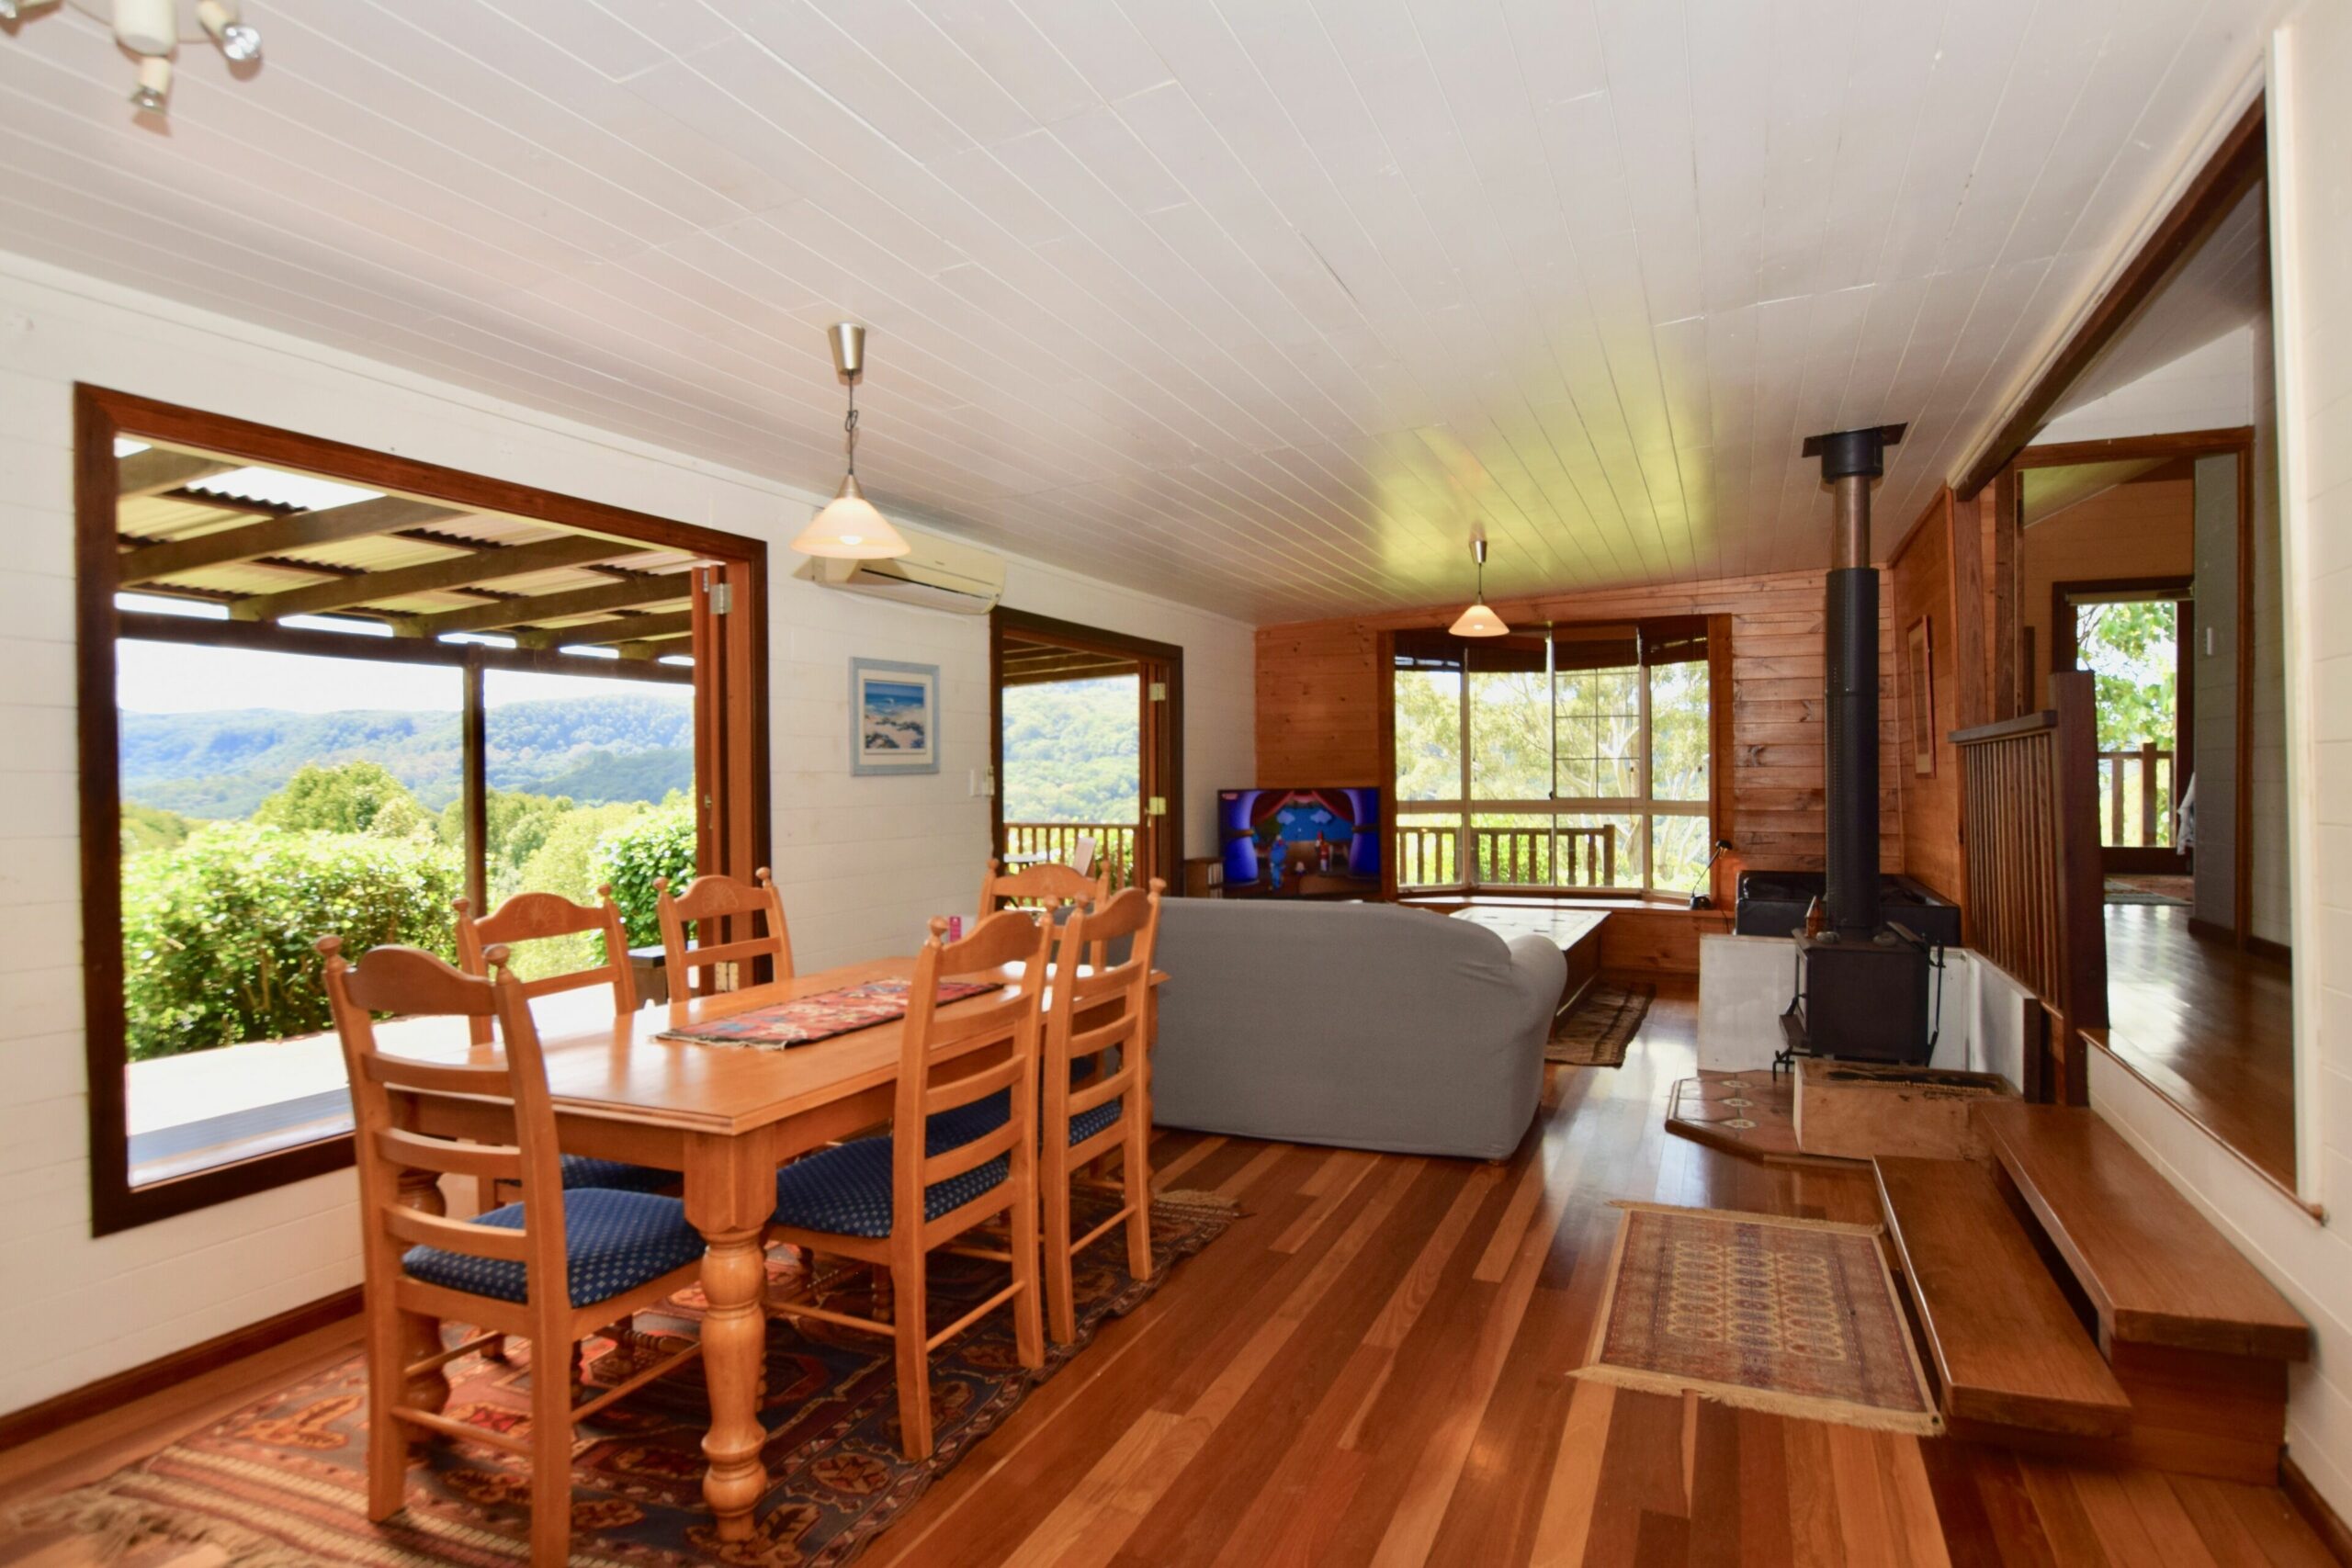 Wyndella Retreat - Converted Banana Shed With Breathtaking Views and Sunsets Plus Mod Cons